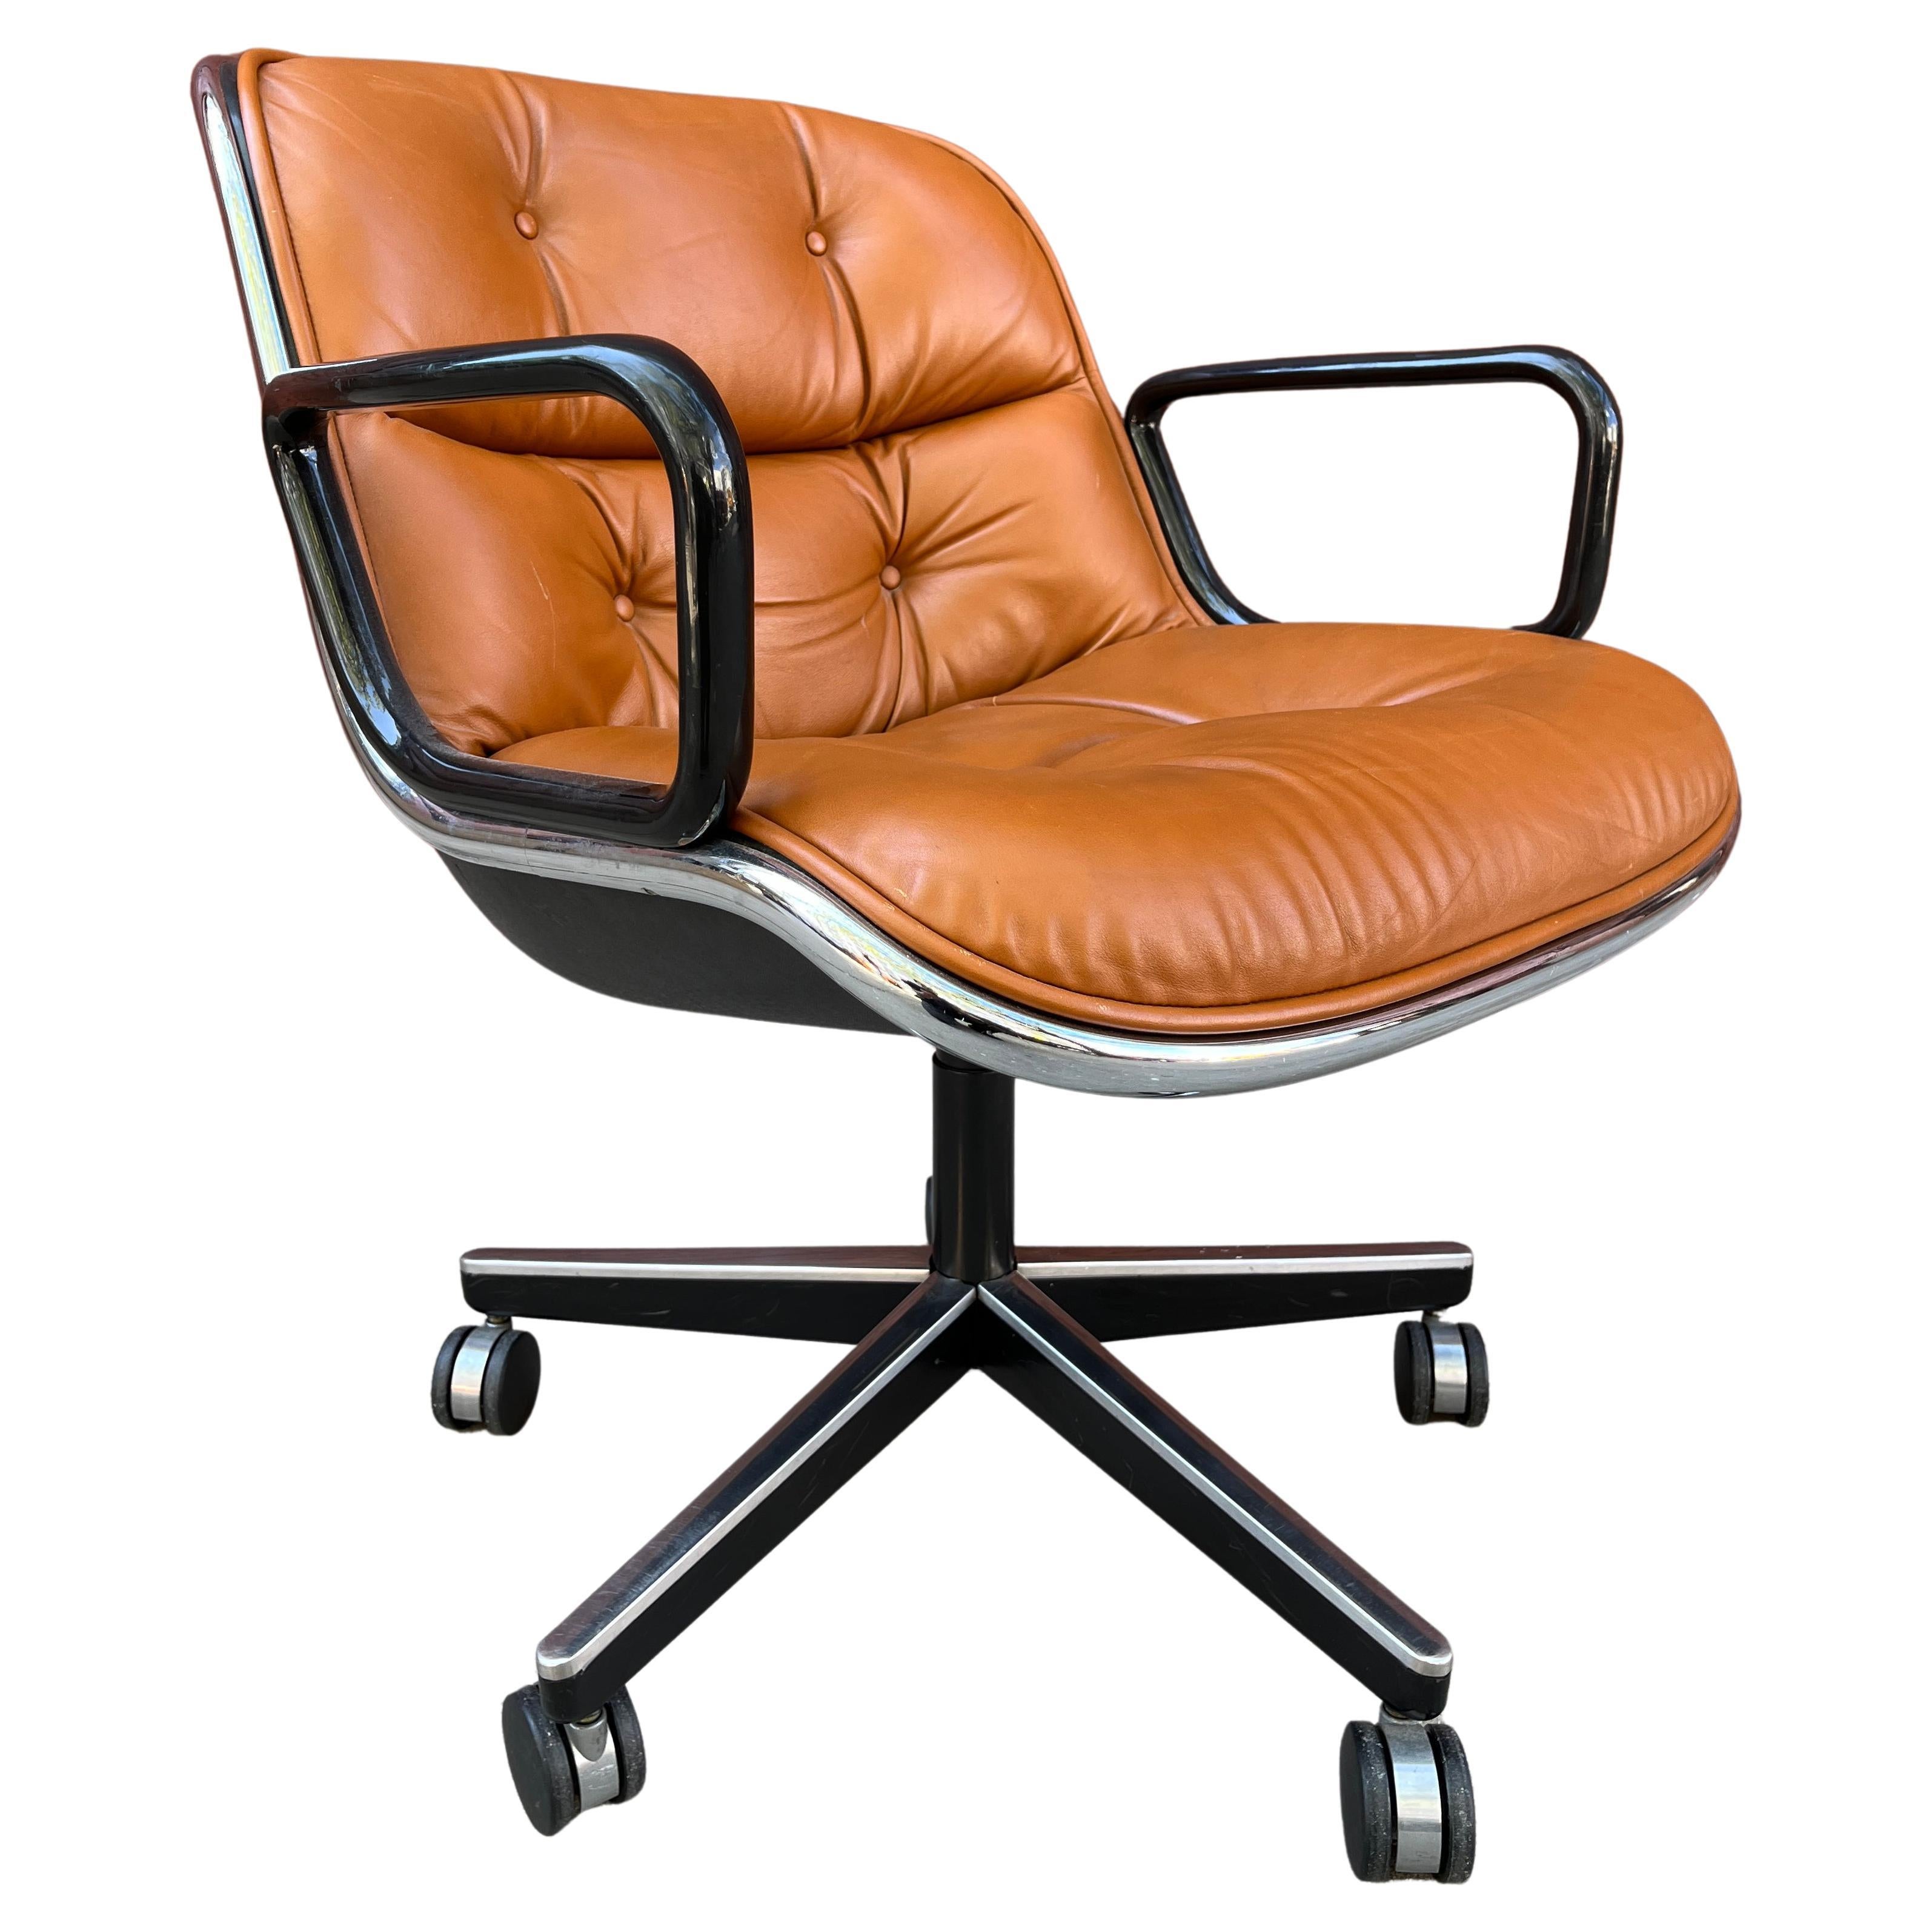 Mid-Century Modern Executive Chair by Charles Pollock for Knoll